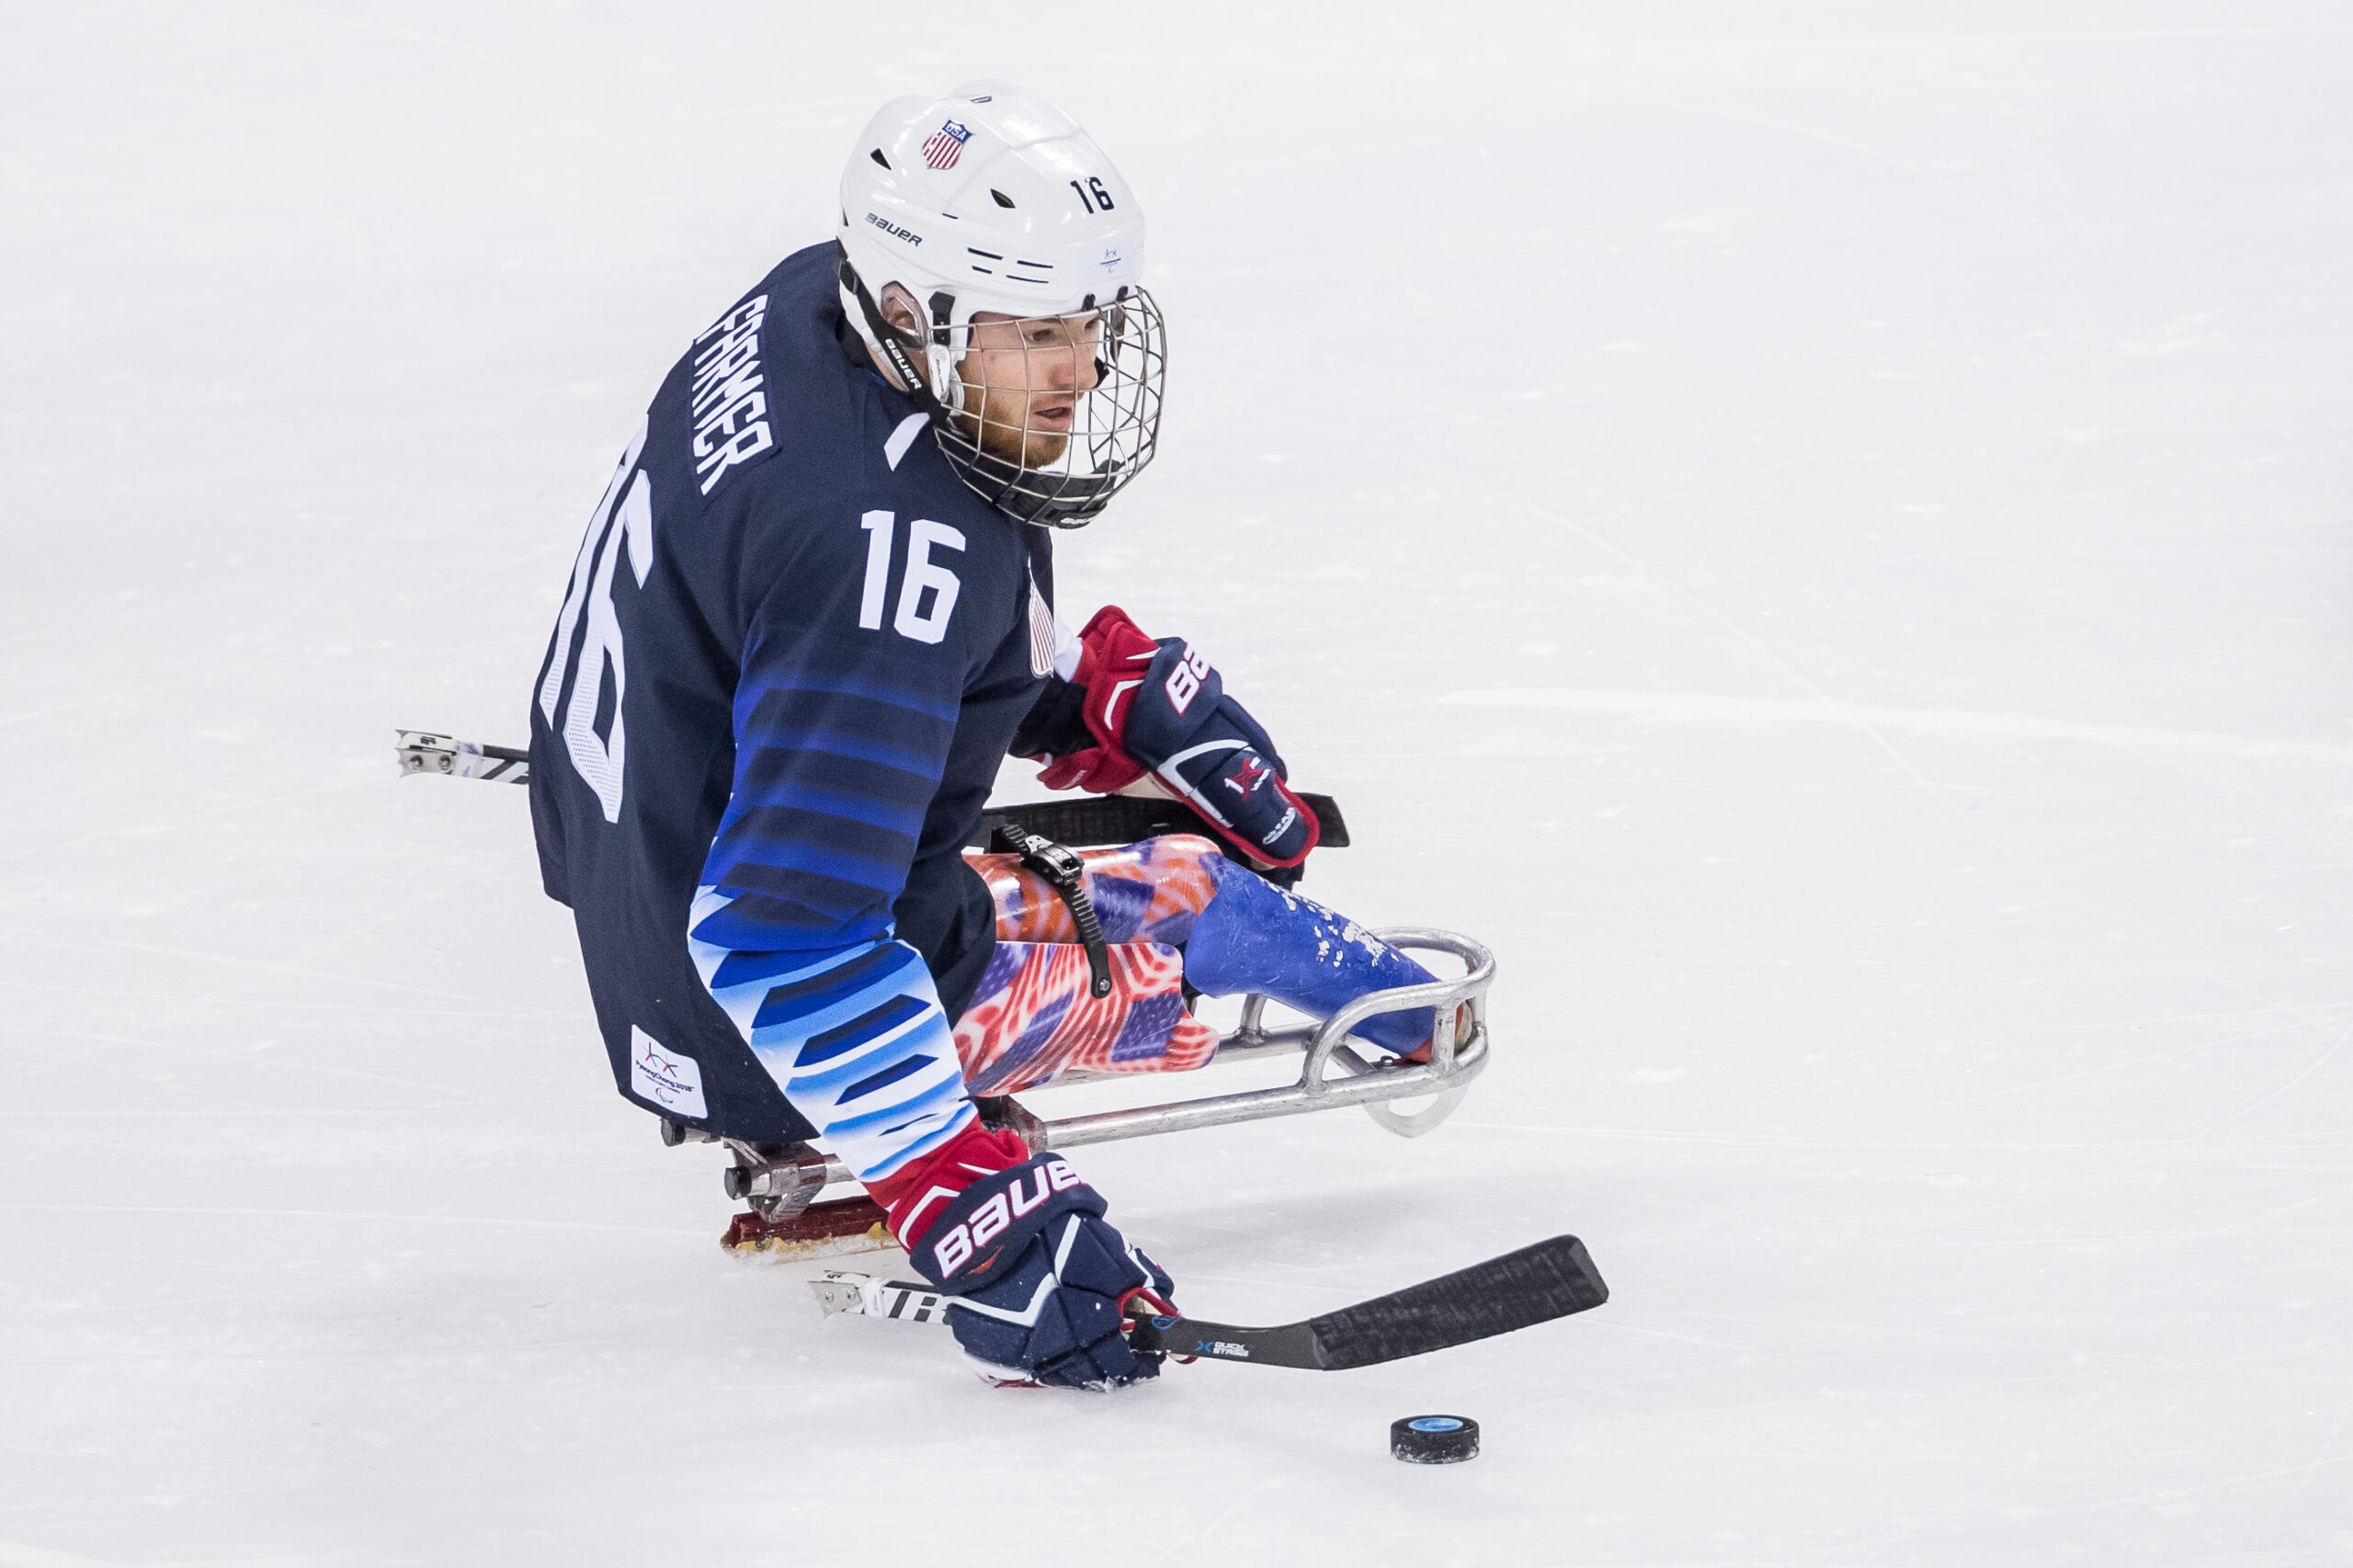 Sled Hockey Player on the ice getting ready to hit the puck with his stick